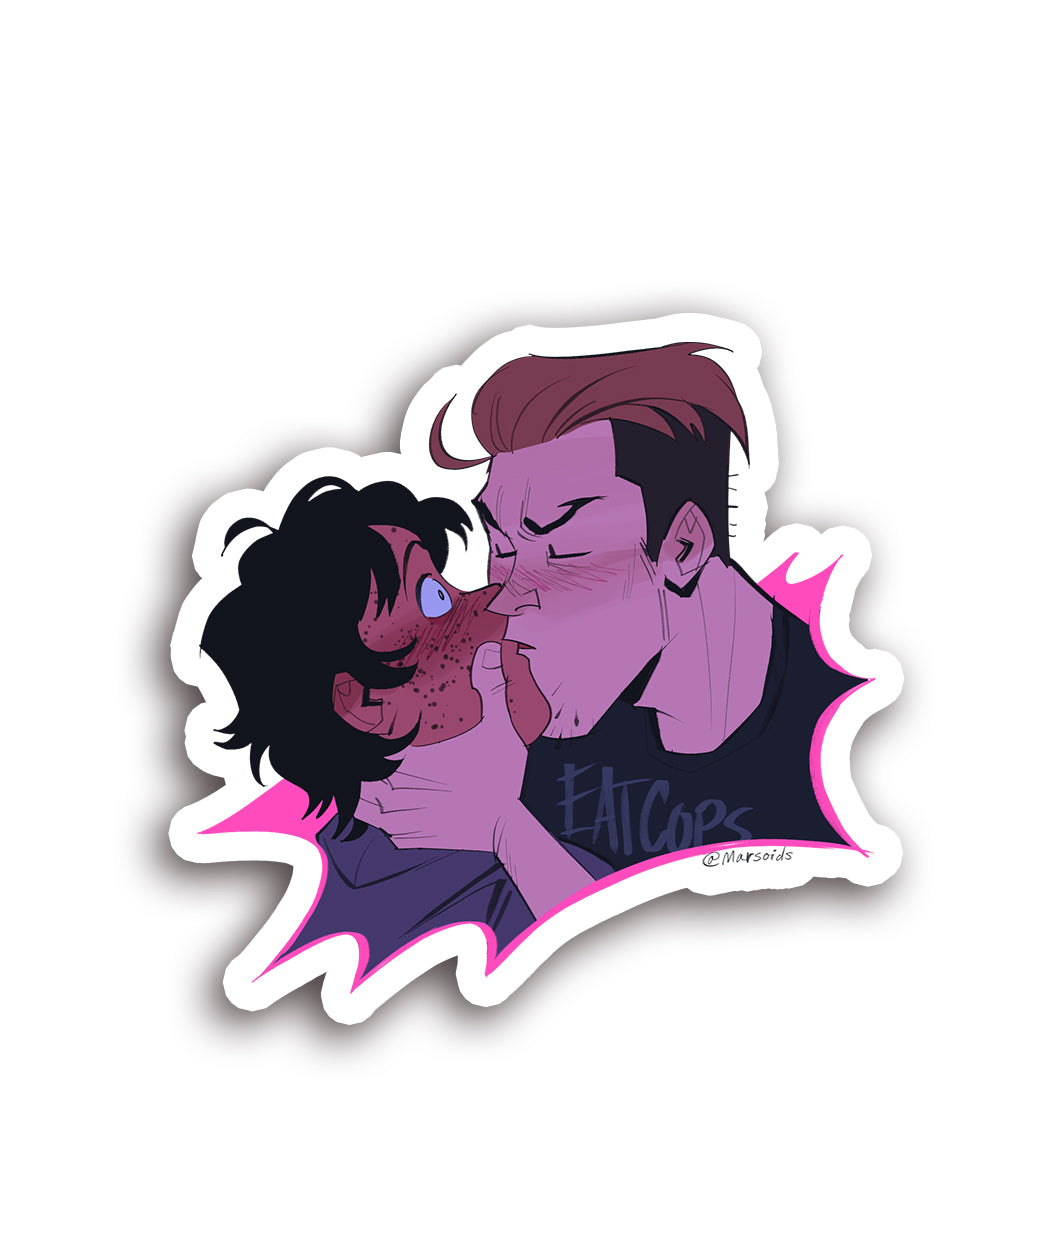 A sticker of two people kissing and one looking surprised. 